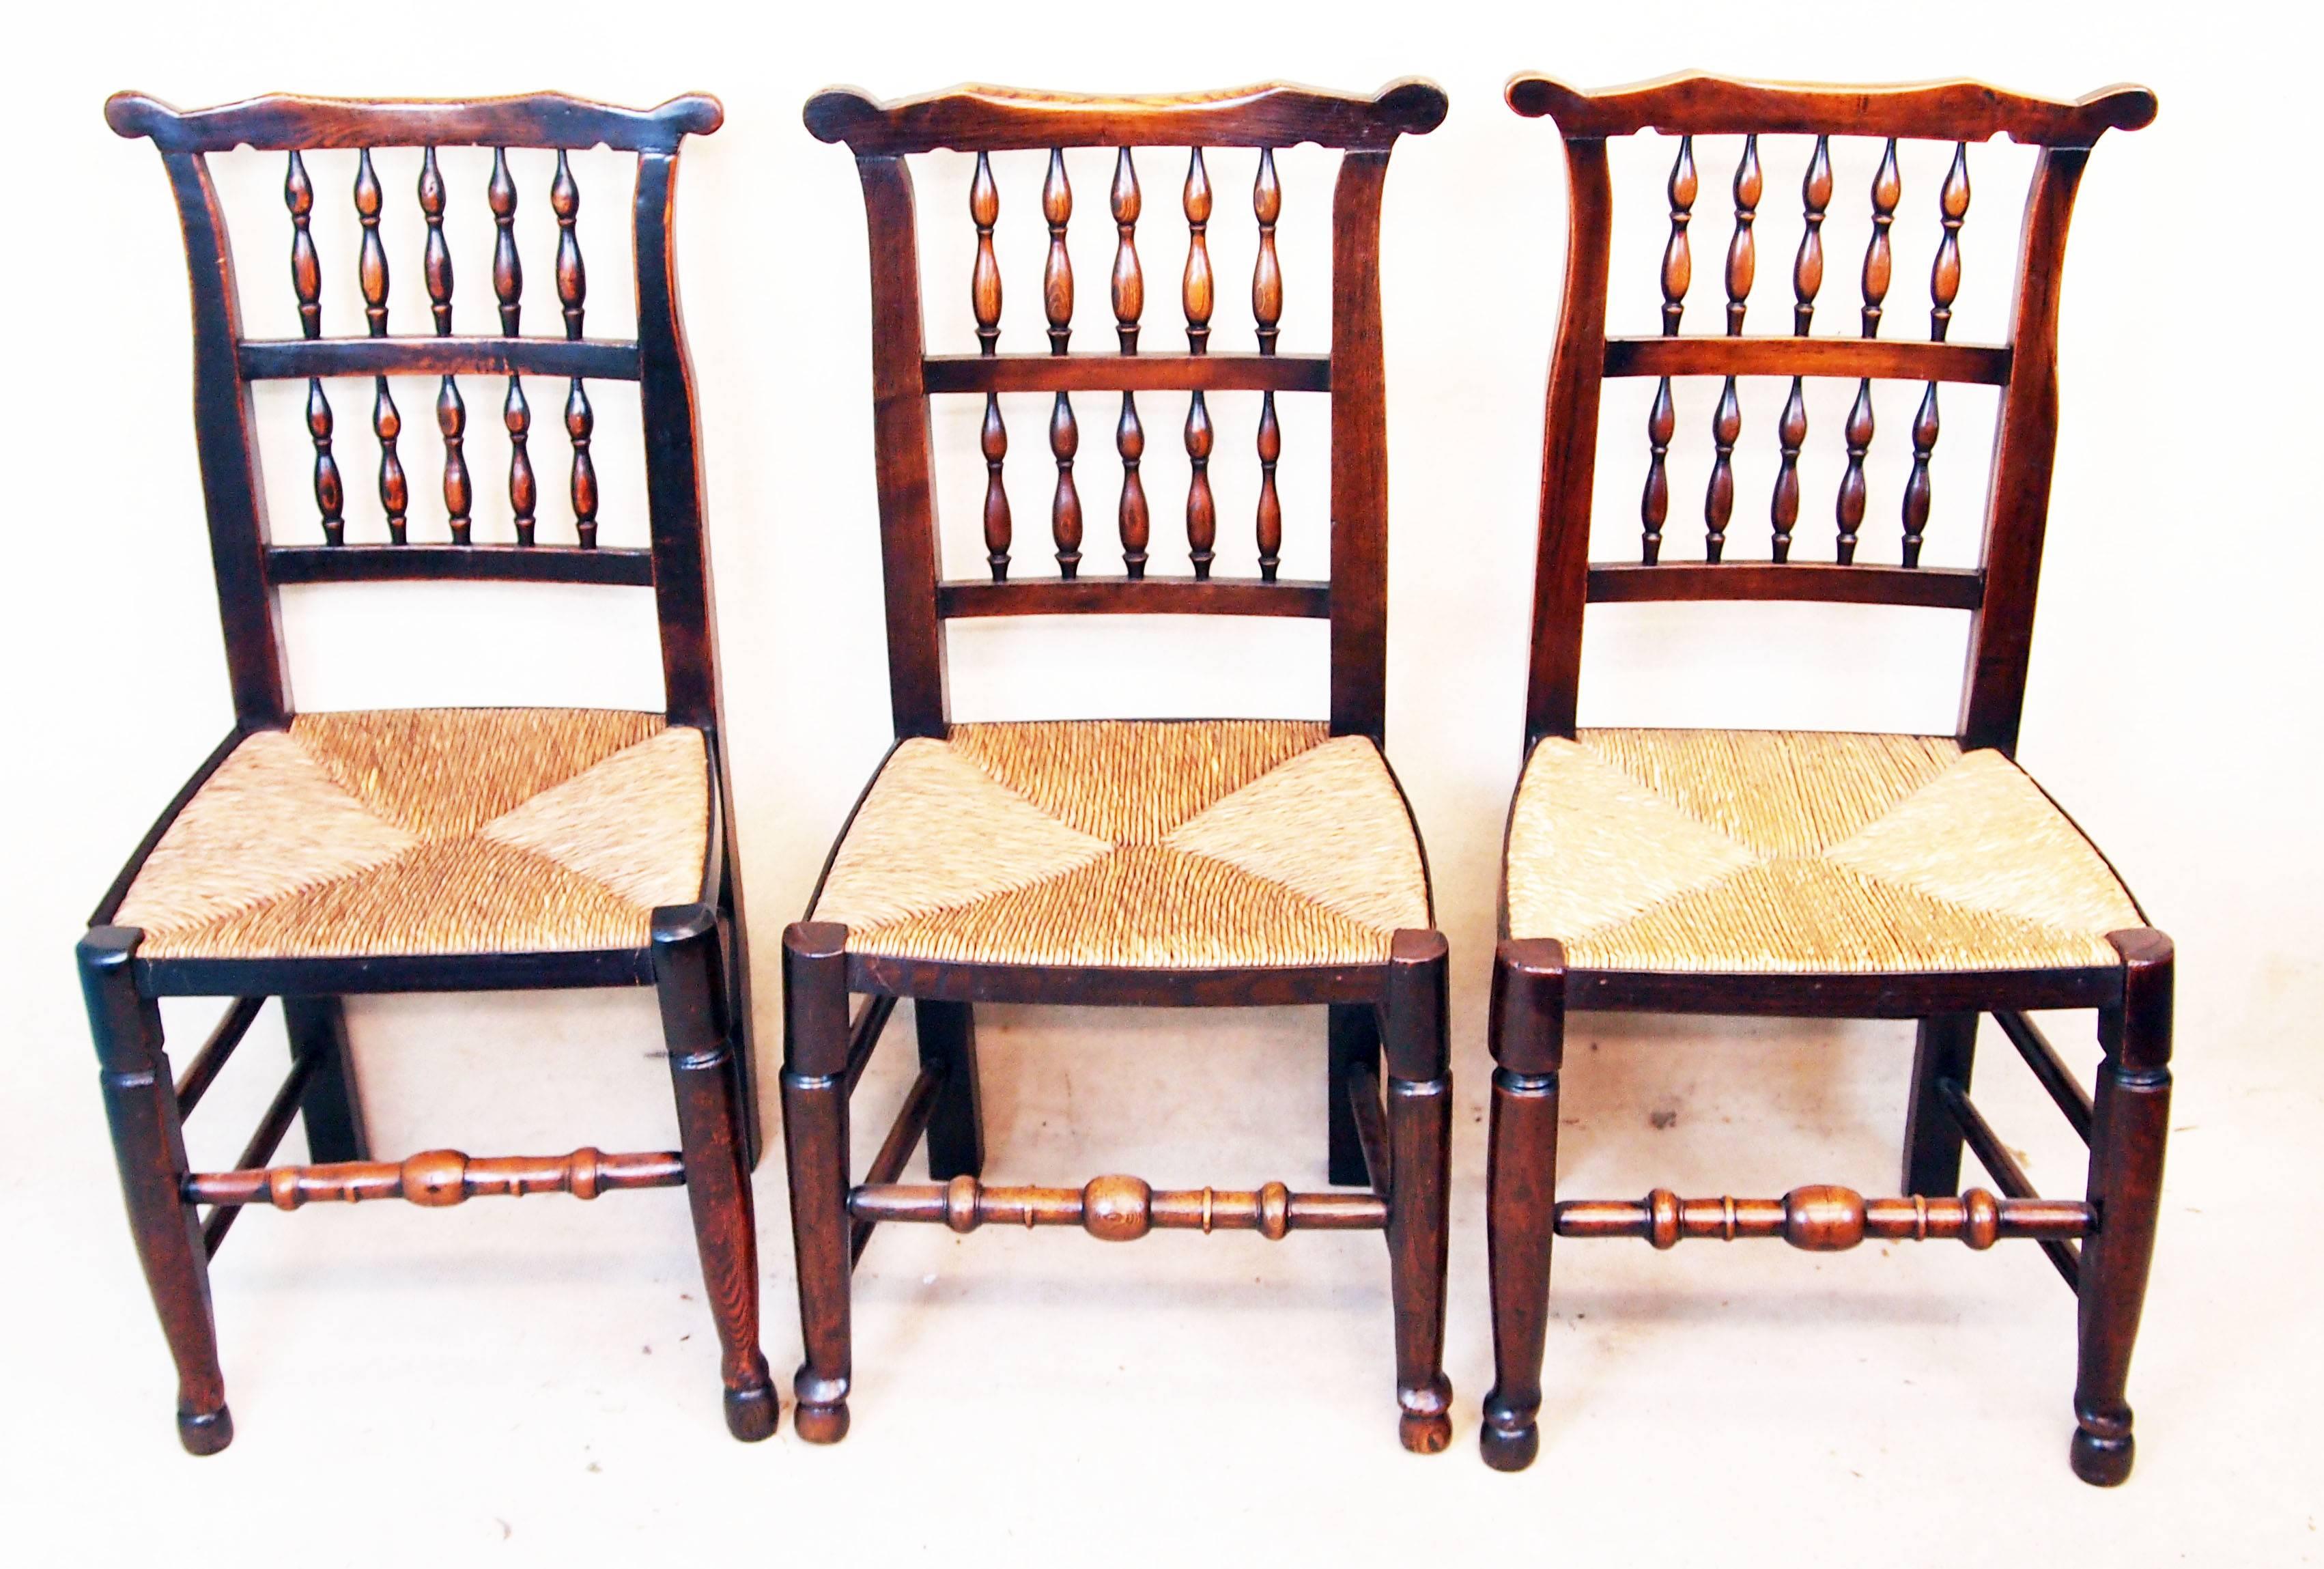 A very attractive matched set of eight (six single and two arm) early 19th
century ash and elm spindle back dining chairs having rush
seats in good order raised on elegant turned legs and
stretchers,

circa 1800.

Measures: Height 37in